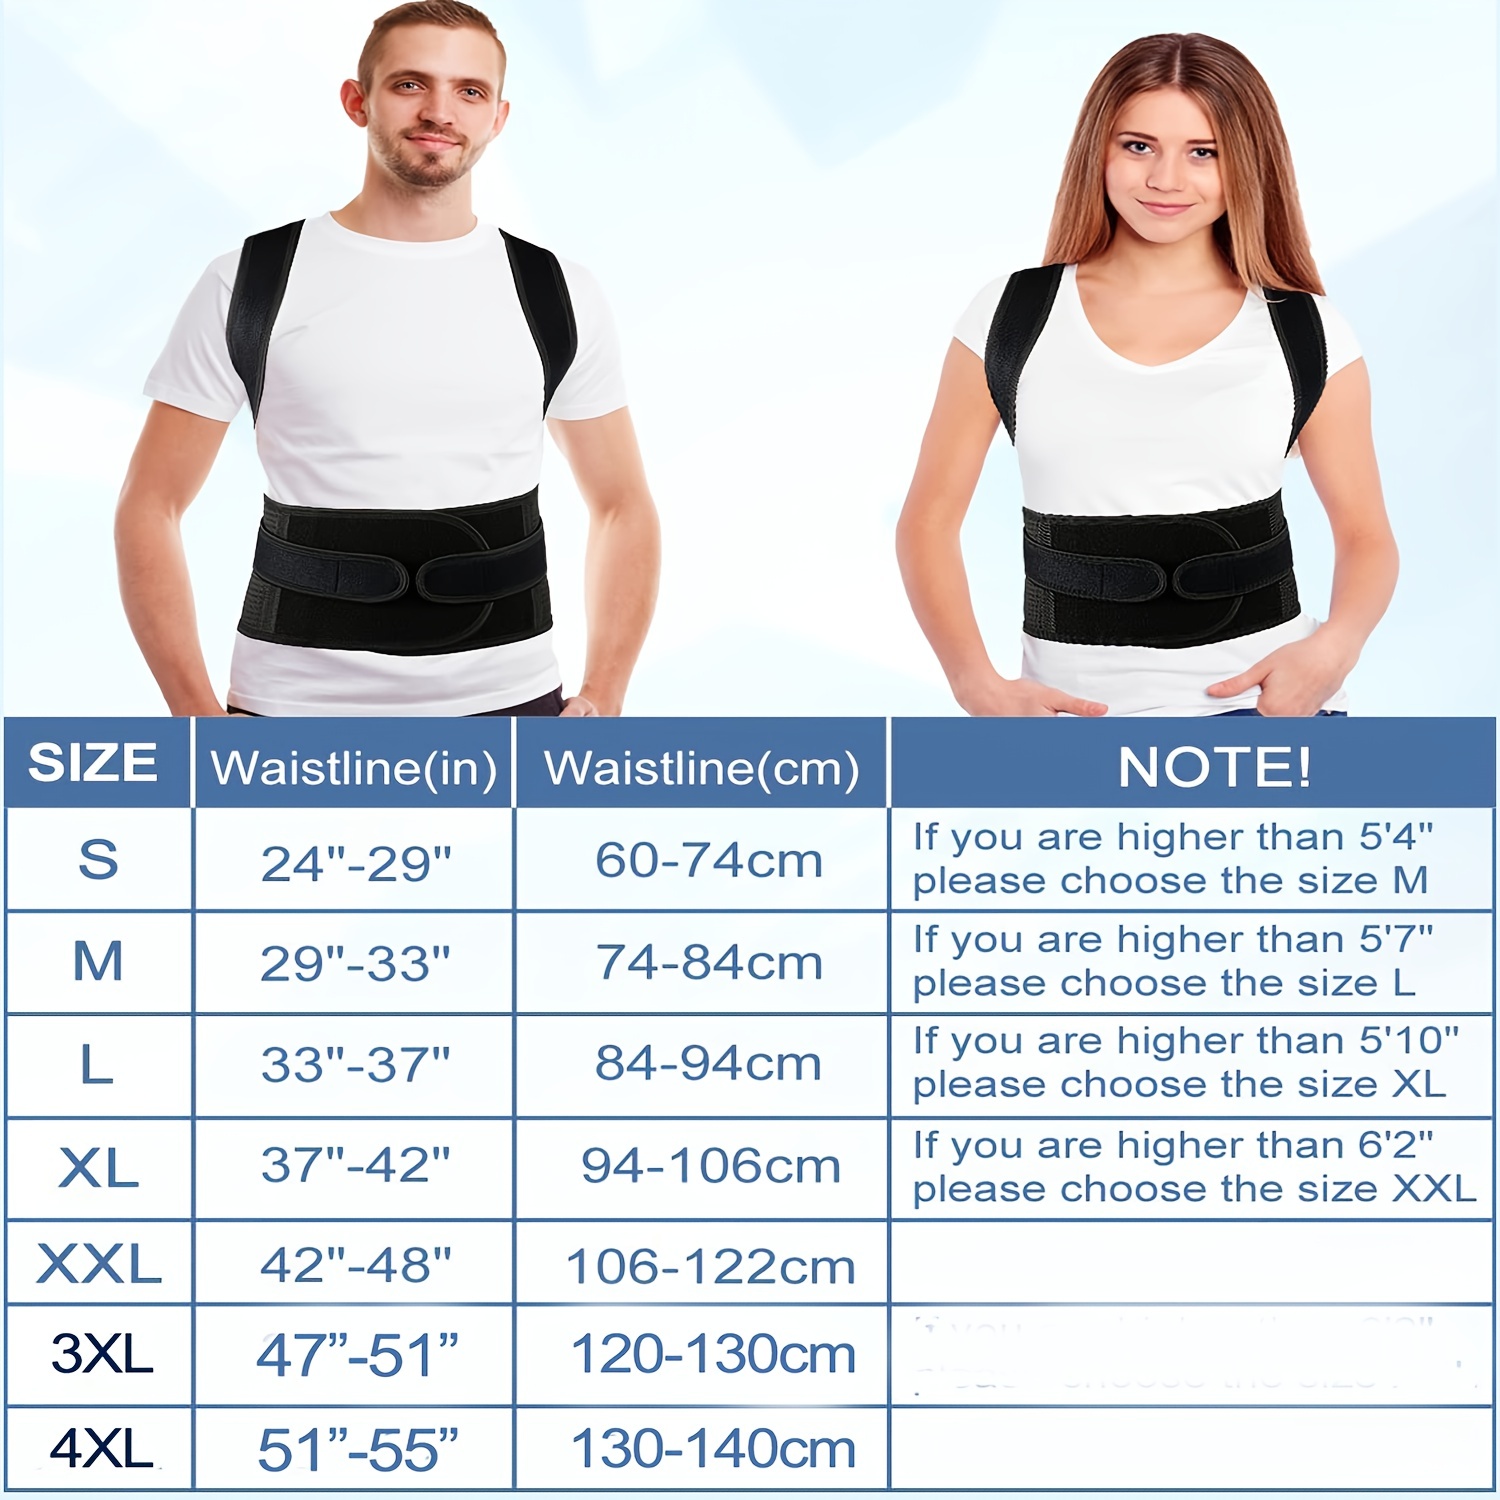 Comfy brace shoulder spinal posture corrector for men and women, fully  adjustable M size, Health & Nutrition, Braces, Support & Protection on  Carousell